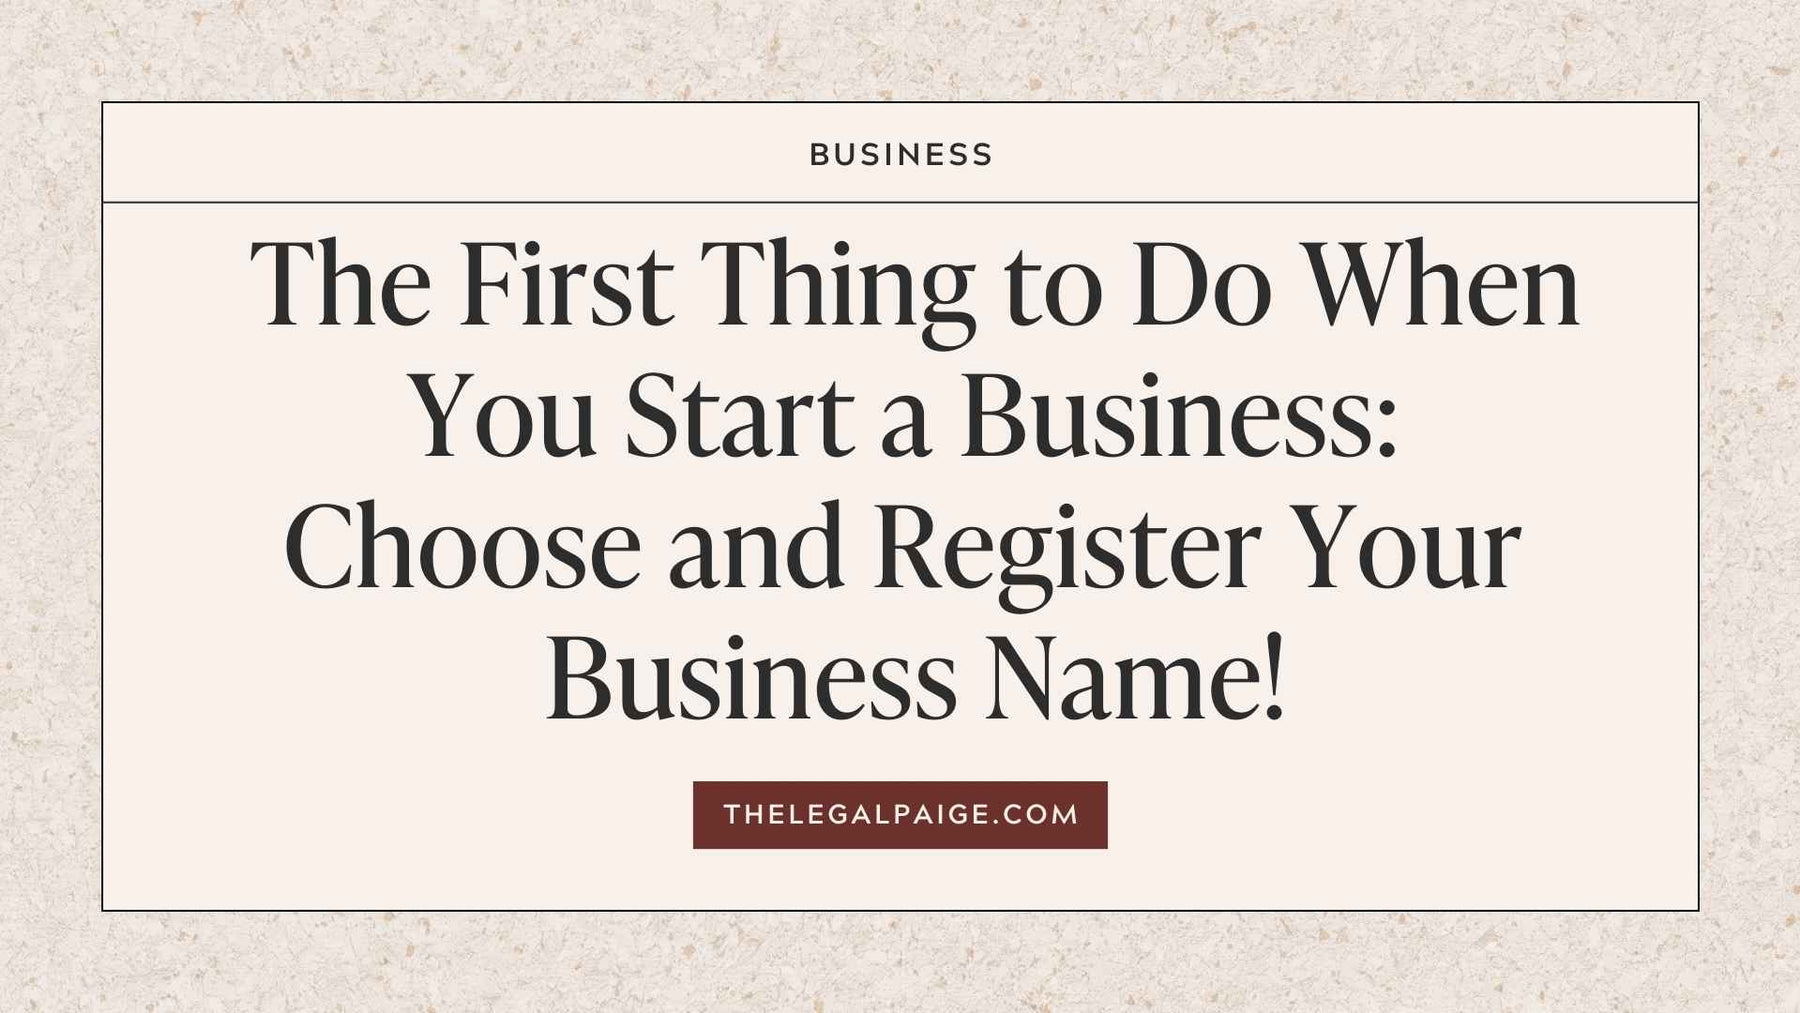 The First Thing to Do When You Start a Business: Choose and Register Your Business Name!